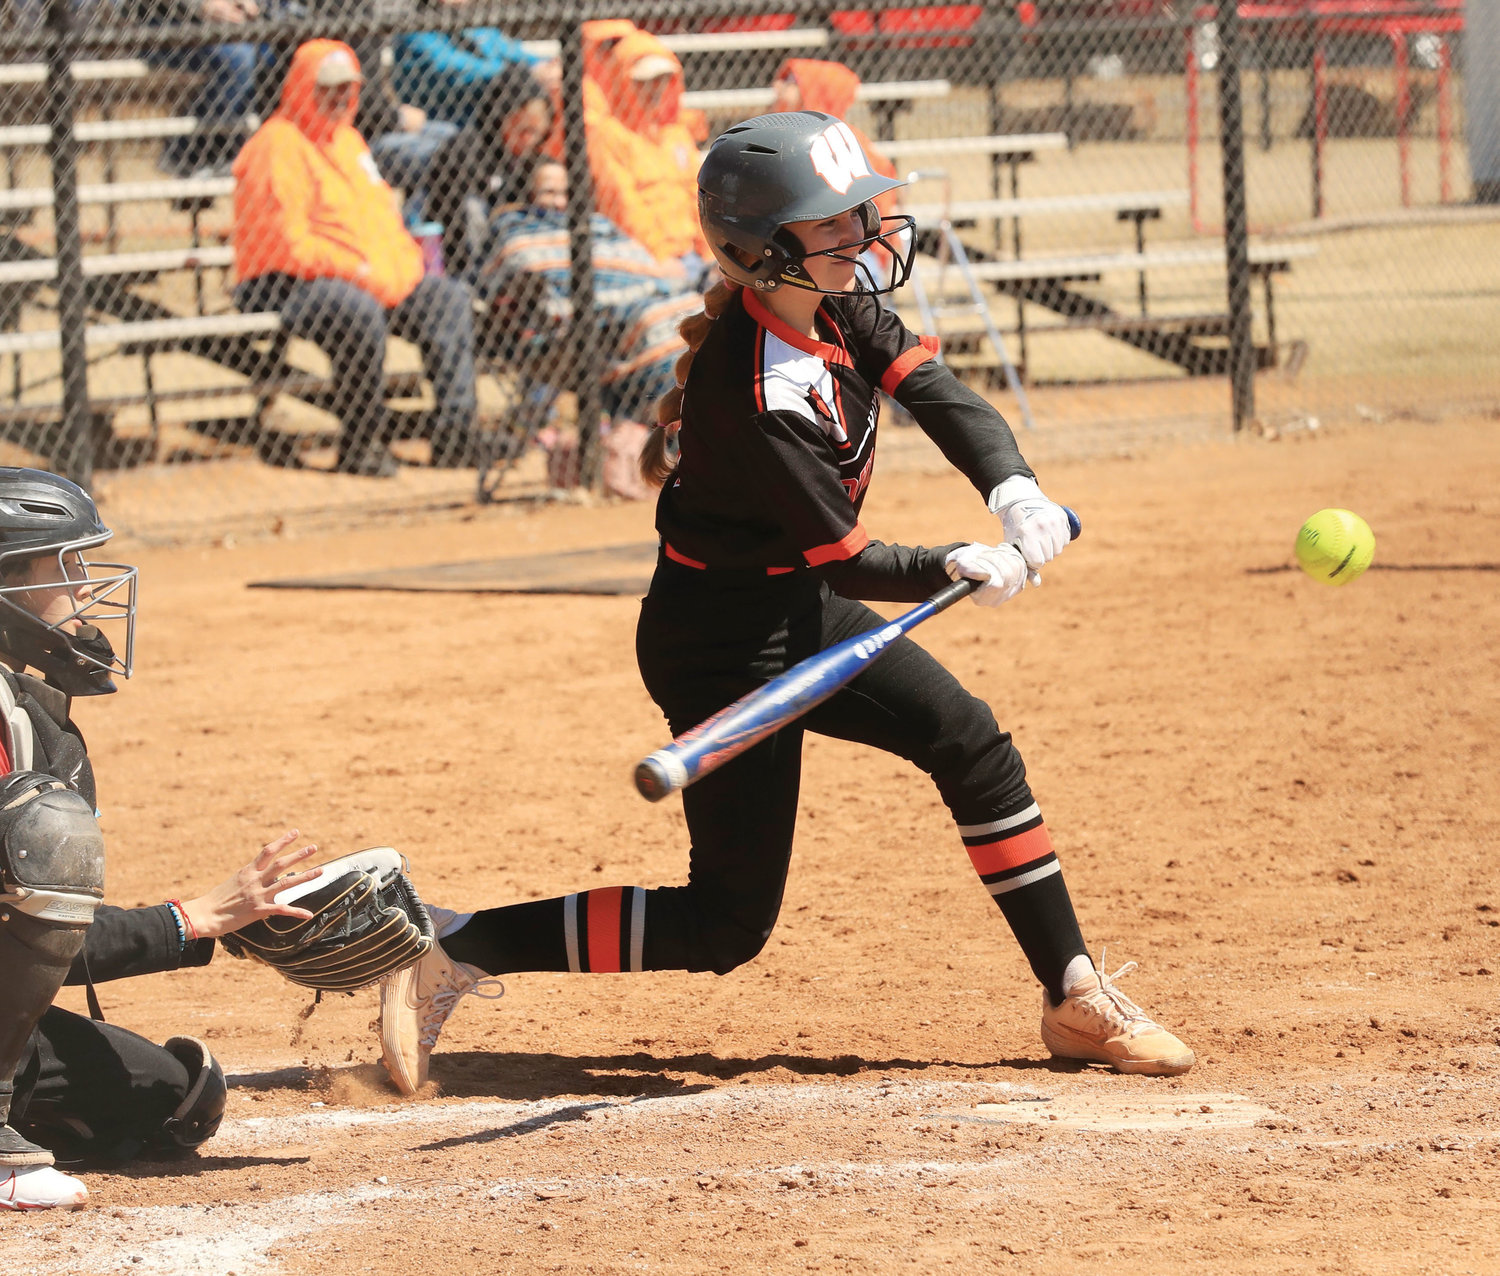 Wayne freshman Madi Sharp gets a hit during Wayne’s 25-0 win over Crooked Oak. Sharp has stepped into duty for the Bulldogs and is hitting it well at the plate.